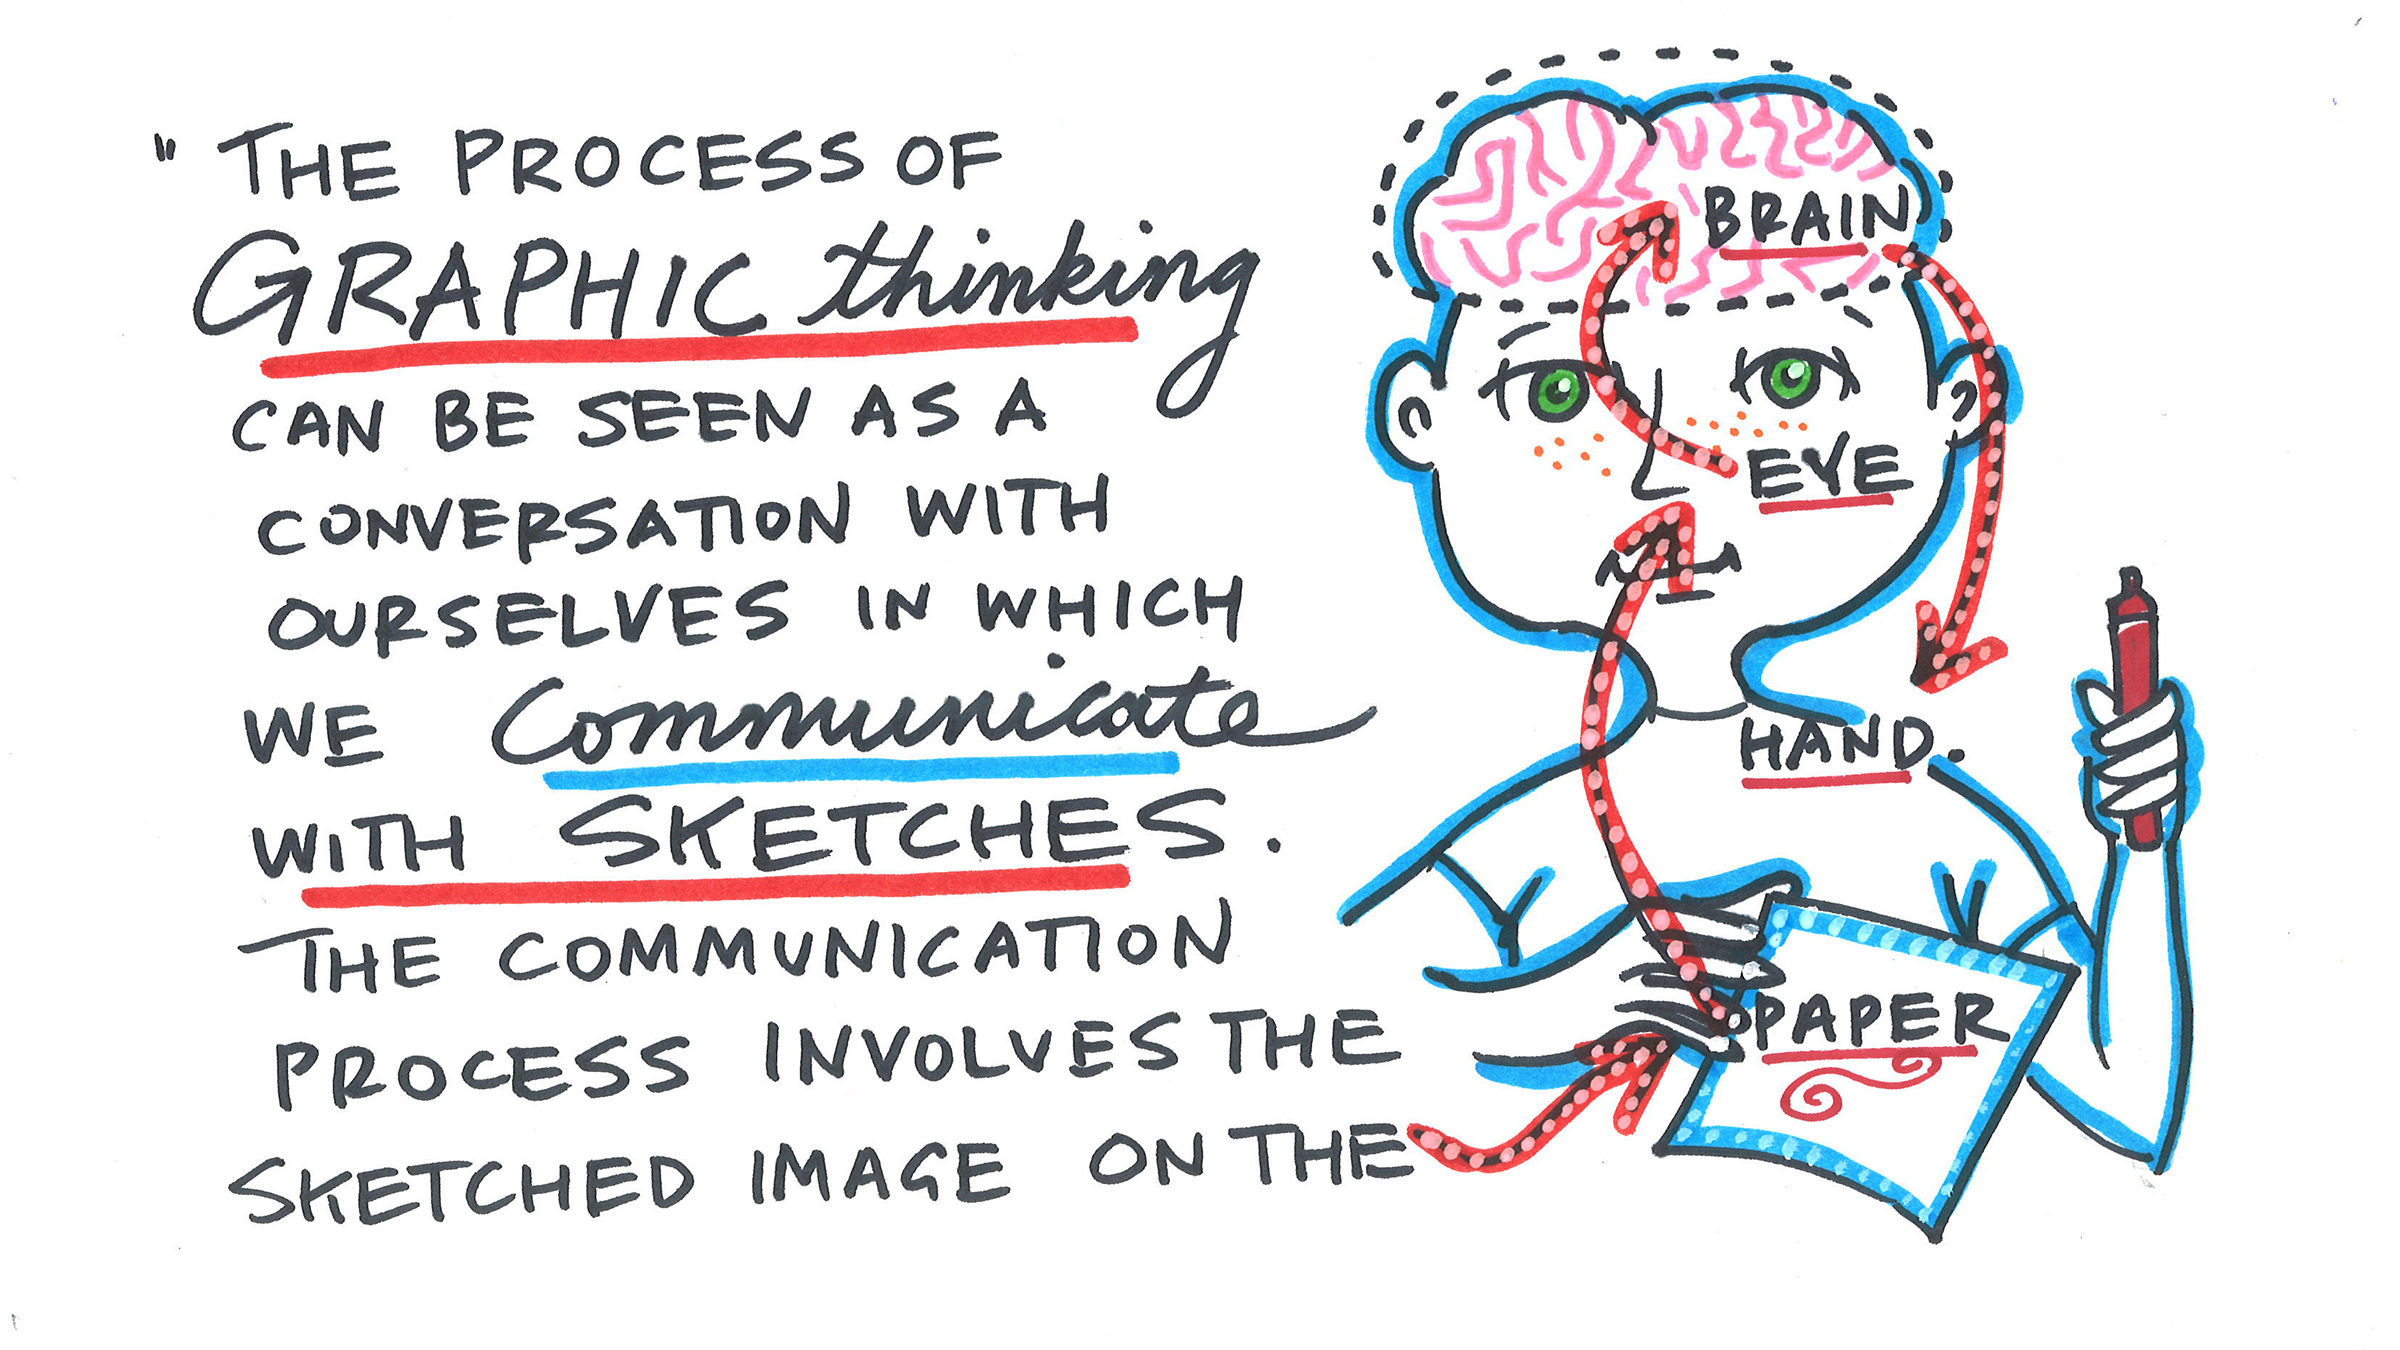 “The process of graphic thinking can be seen as a conversation with ourselves in which we communicate with sketches. The communication process involves the sketched image on the paper, the eye, the brain, and the hand.”